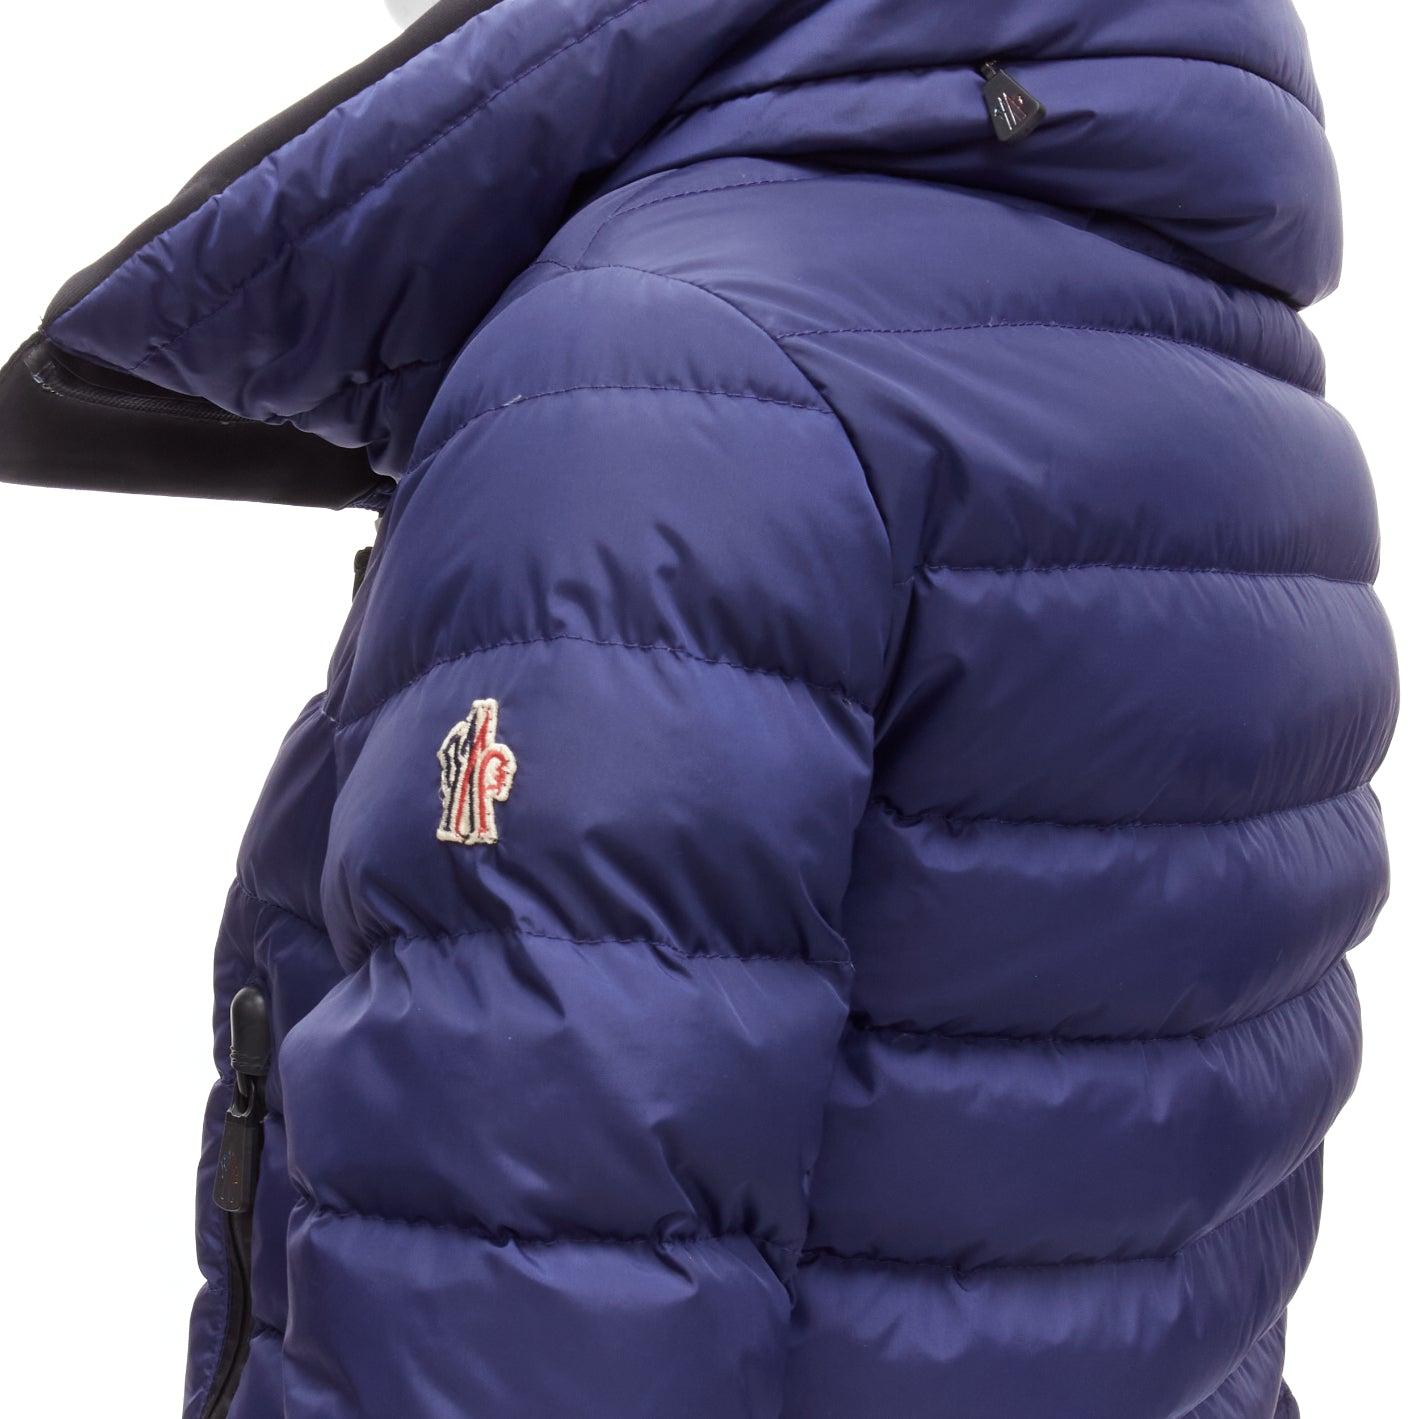 MONCLER GRENOBLE Vonne Giubbotto navy blue black down puffer jacket US00 XXS
Reference: SNKO/A00270
Brand: Moncler
Model: Vonne Giubbotto
Collection: Grenoble
Material: Nylon
Color: Blue, Black
Pattern: Solid
Closure: Zip
Lining: Black Down
Extra